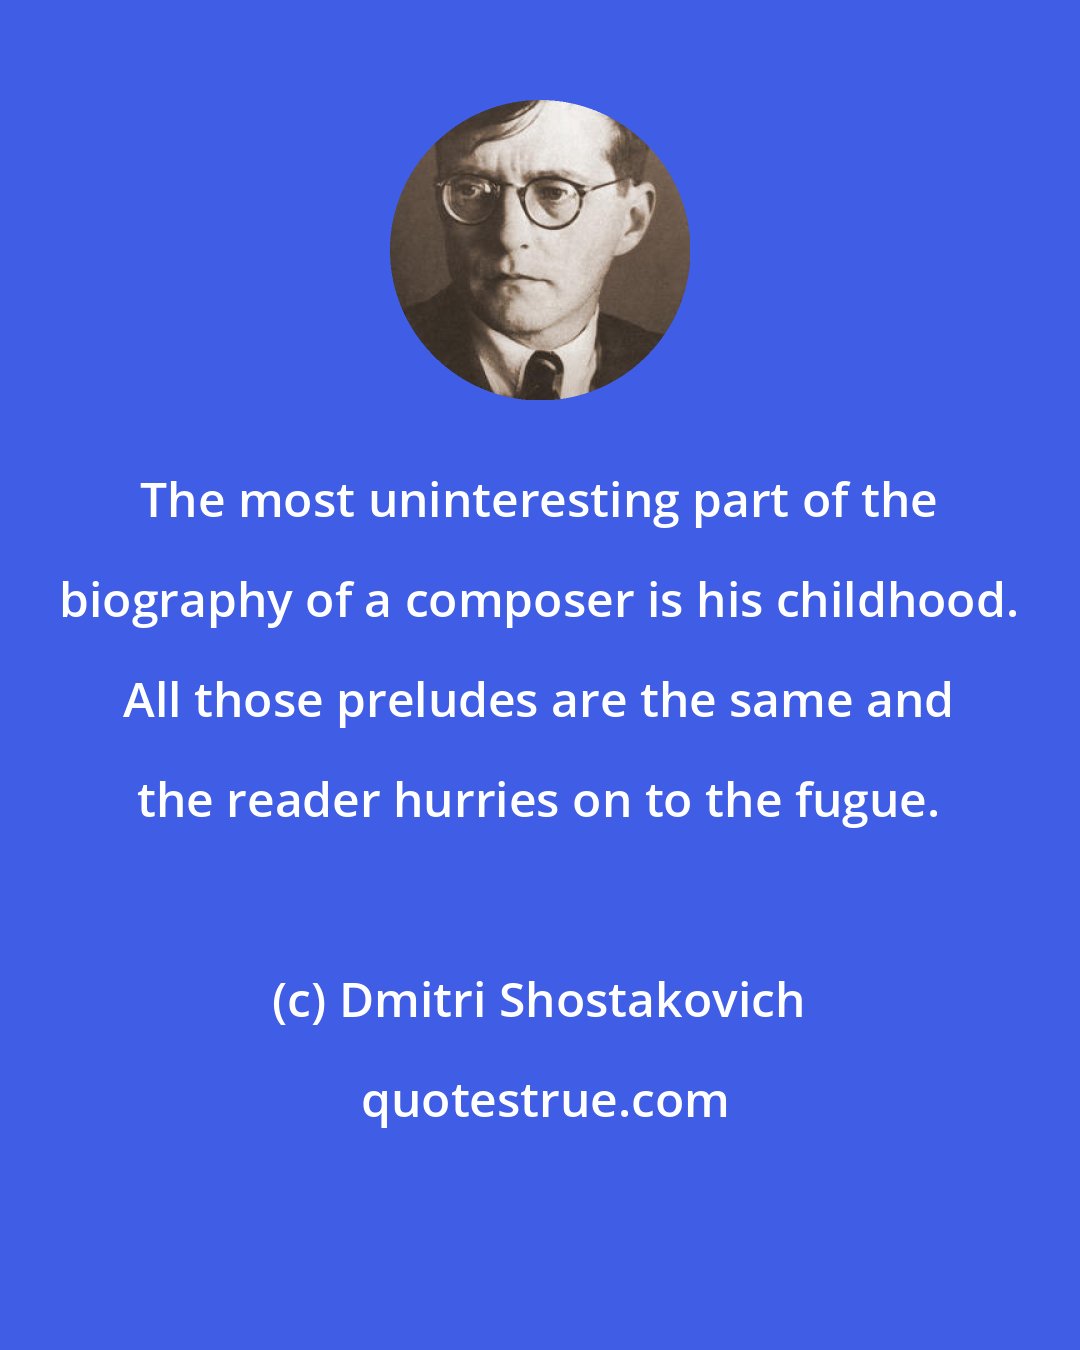 Dmitri Shostakovich: The most uninteresting part of the biography of a composer is his childhood. All those preludes are the same and the reader hurries on to the fugue.